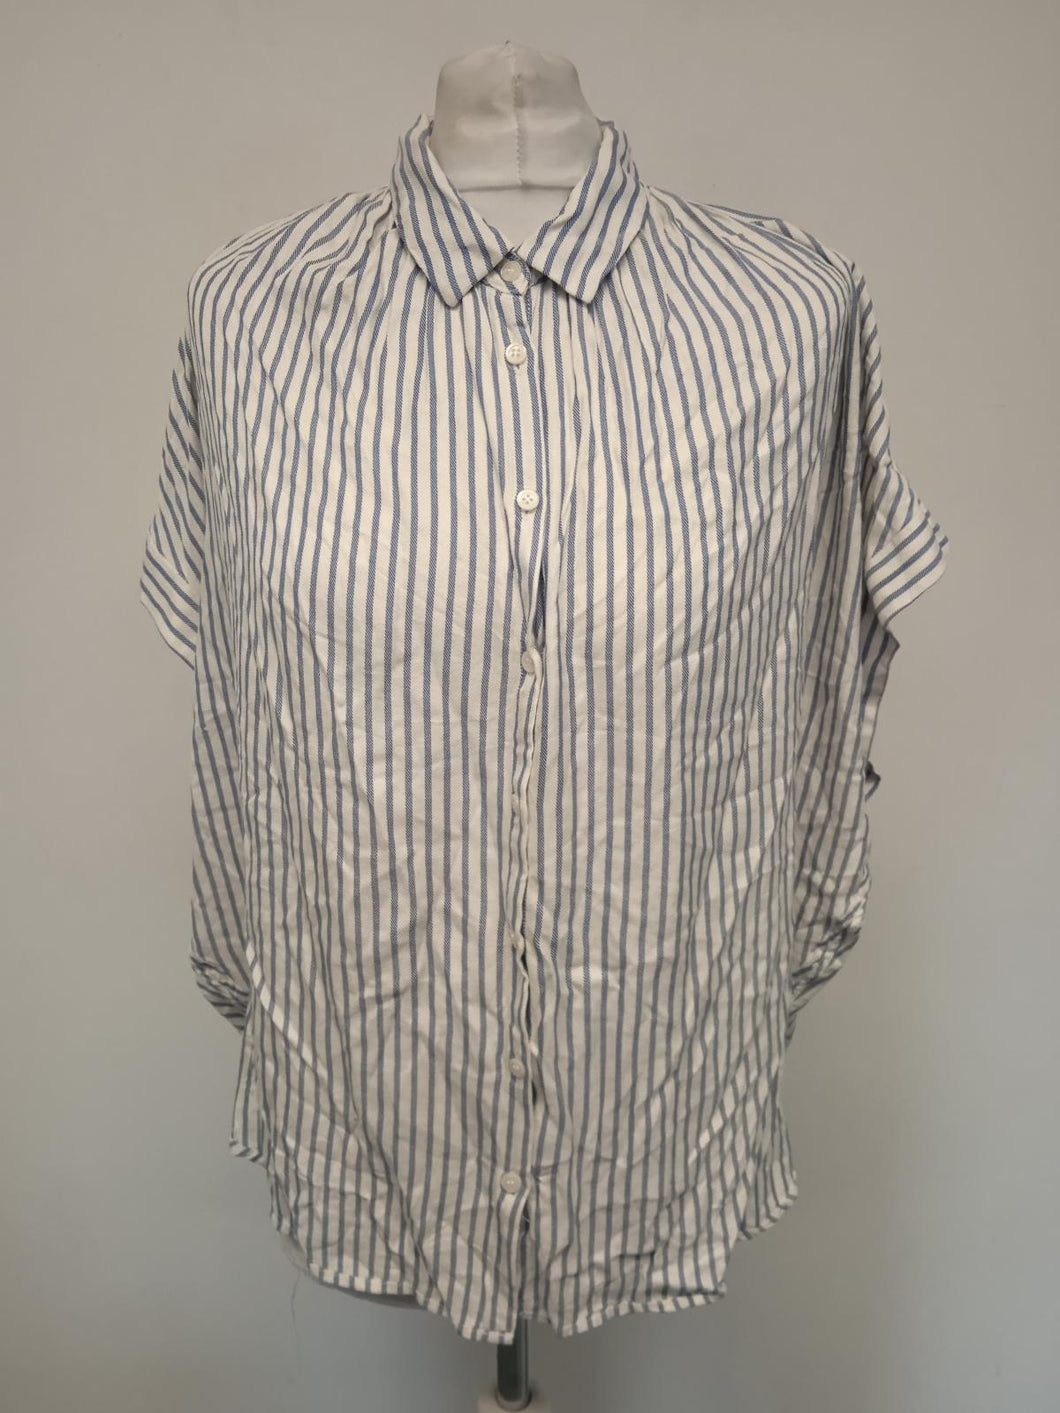 MADEWELL Ladies White & Blue Striped Hi-Low Oversized Shirt Blouse Size L